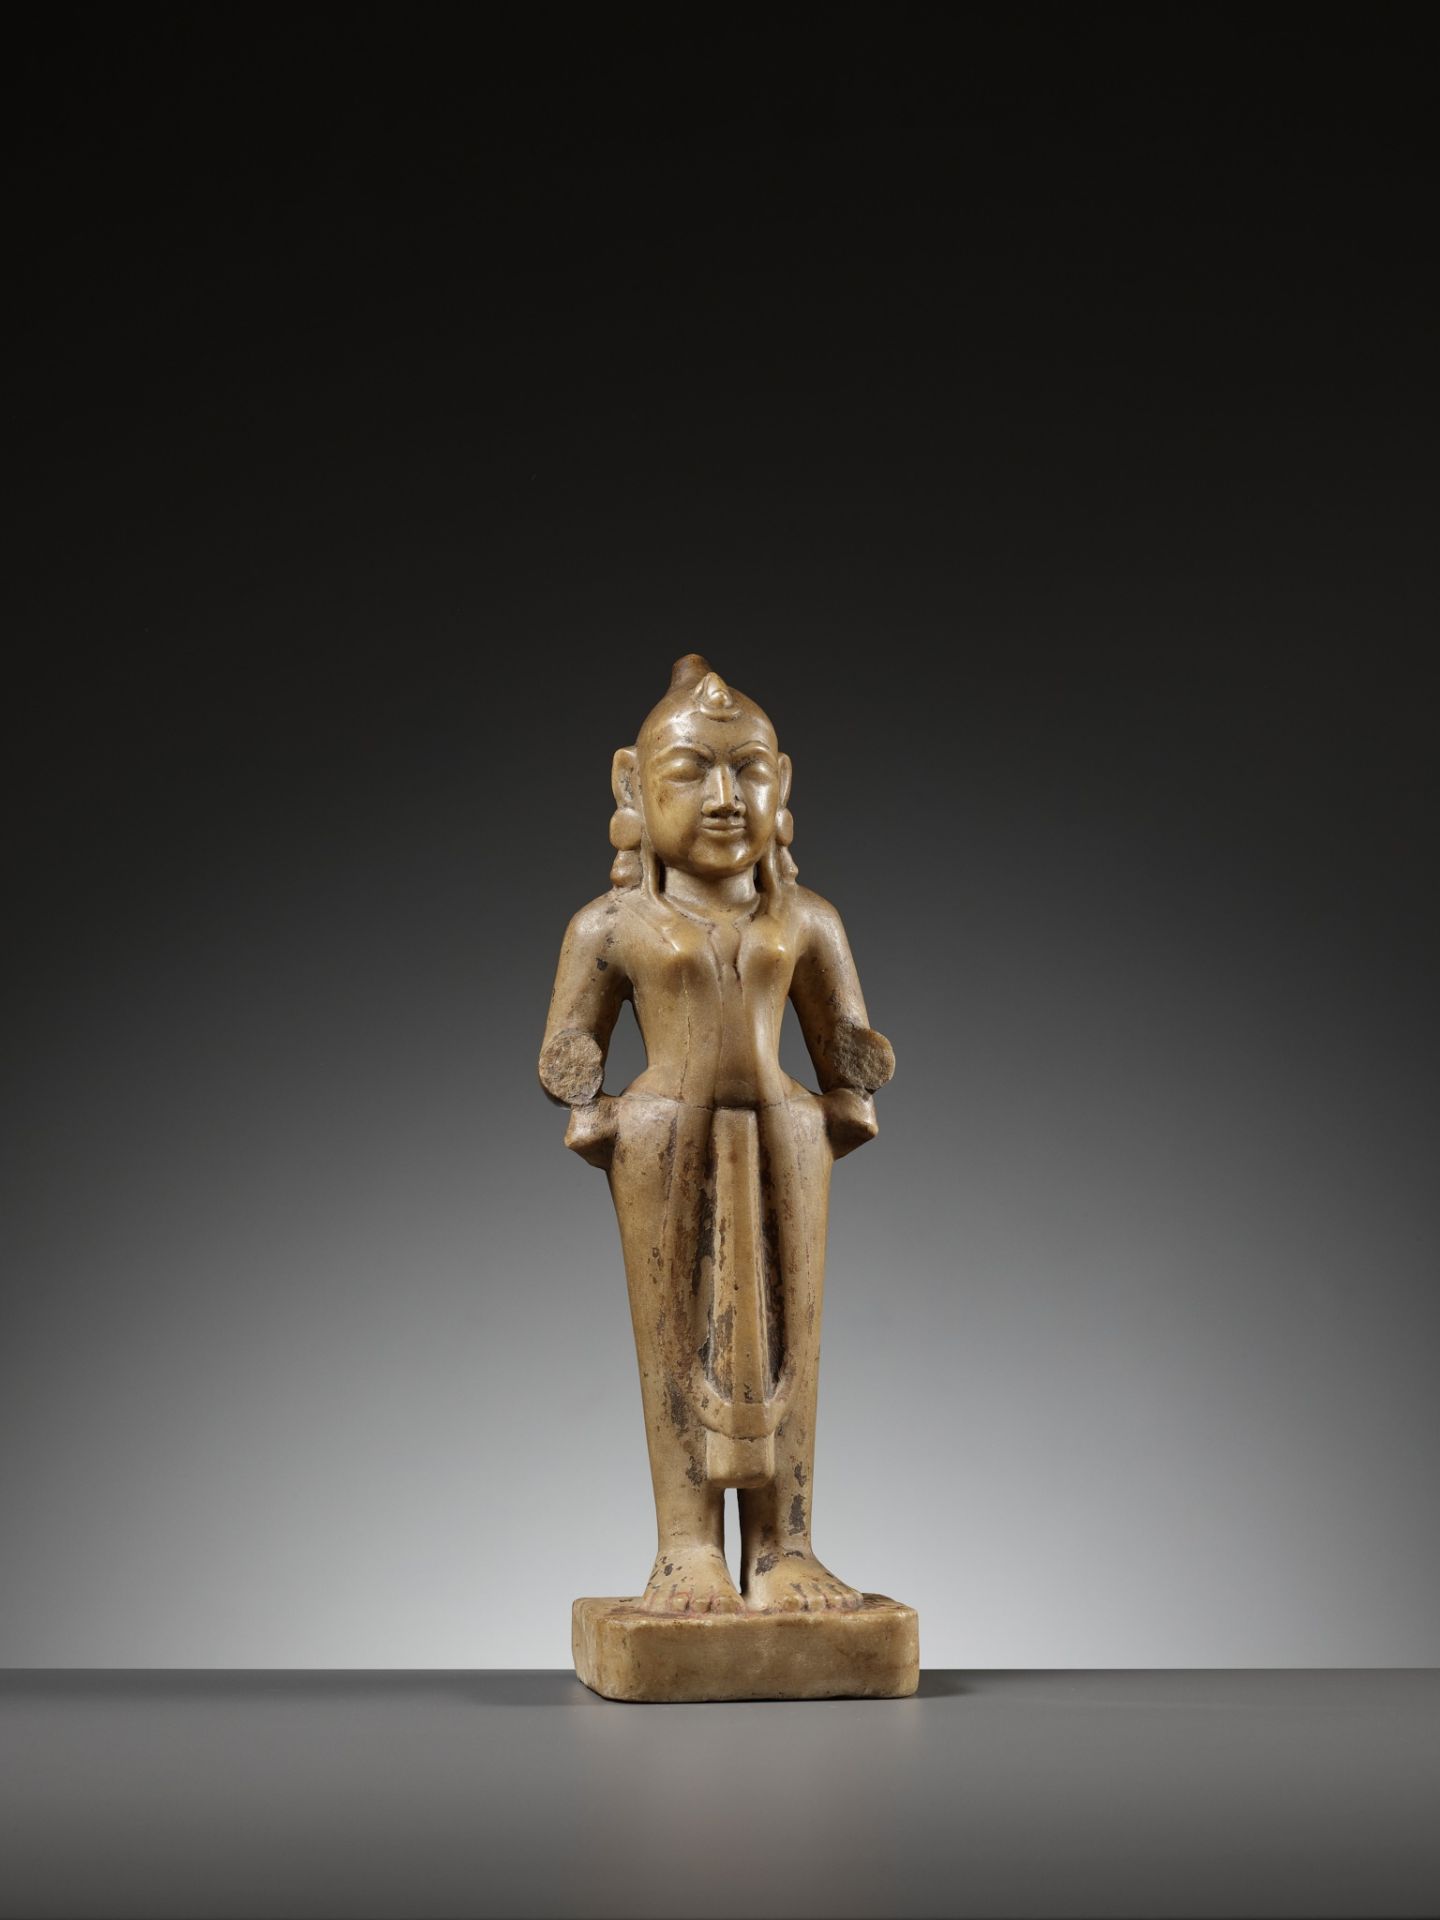 A MARBLE FIGURE OF RADHA, WESTERN INDIA, GUJARAT, 13TH-15TH CENTURY - Image 11 of 13